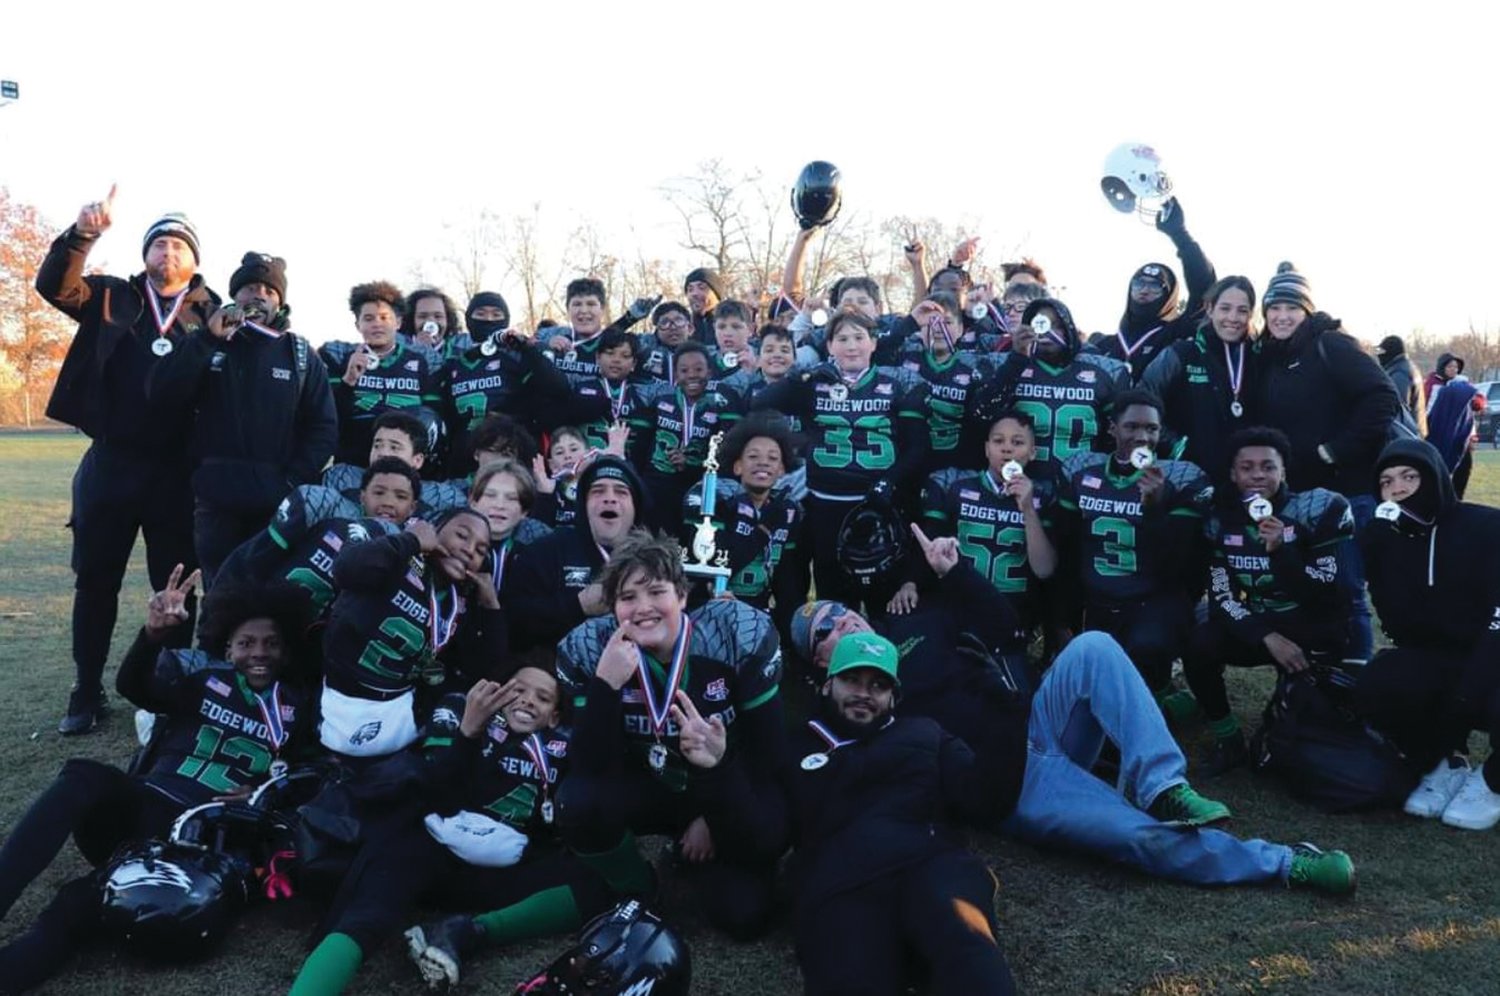 FLORIDA BOUND: The Edgewood 12-U football team after winning the New England Championship. (Submitted photos)